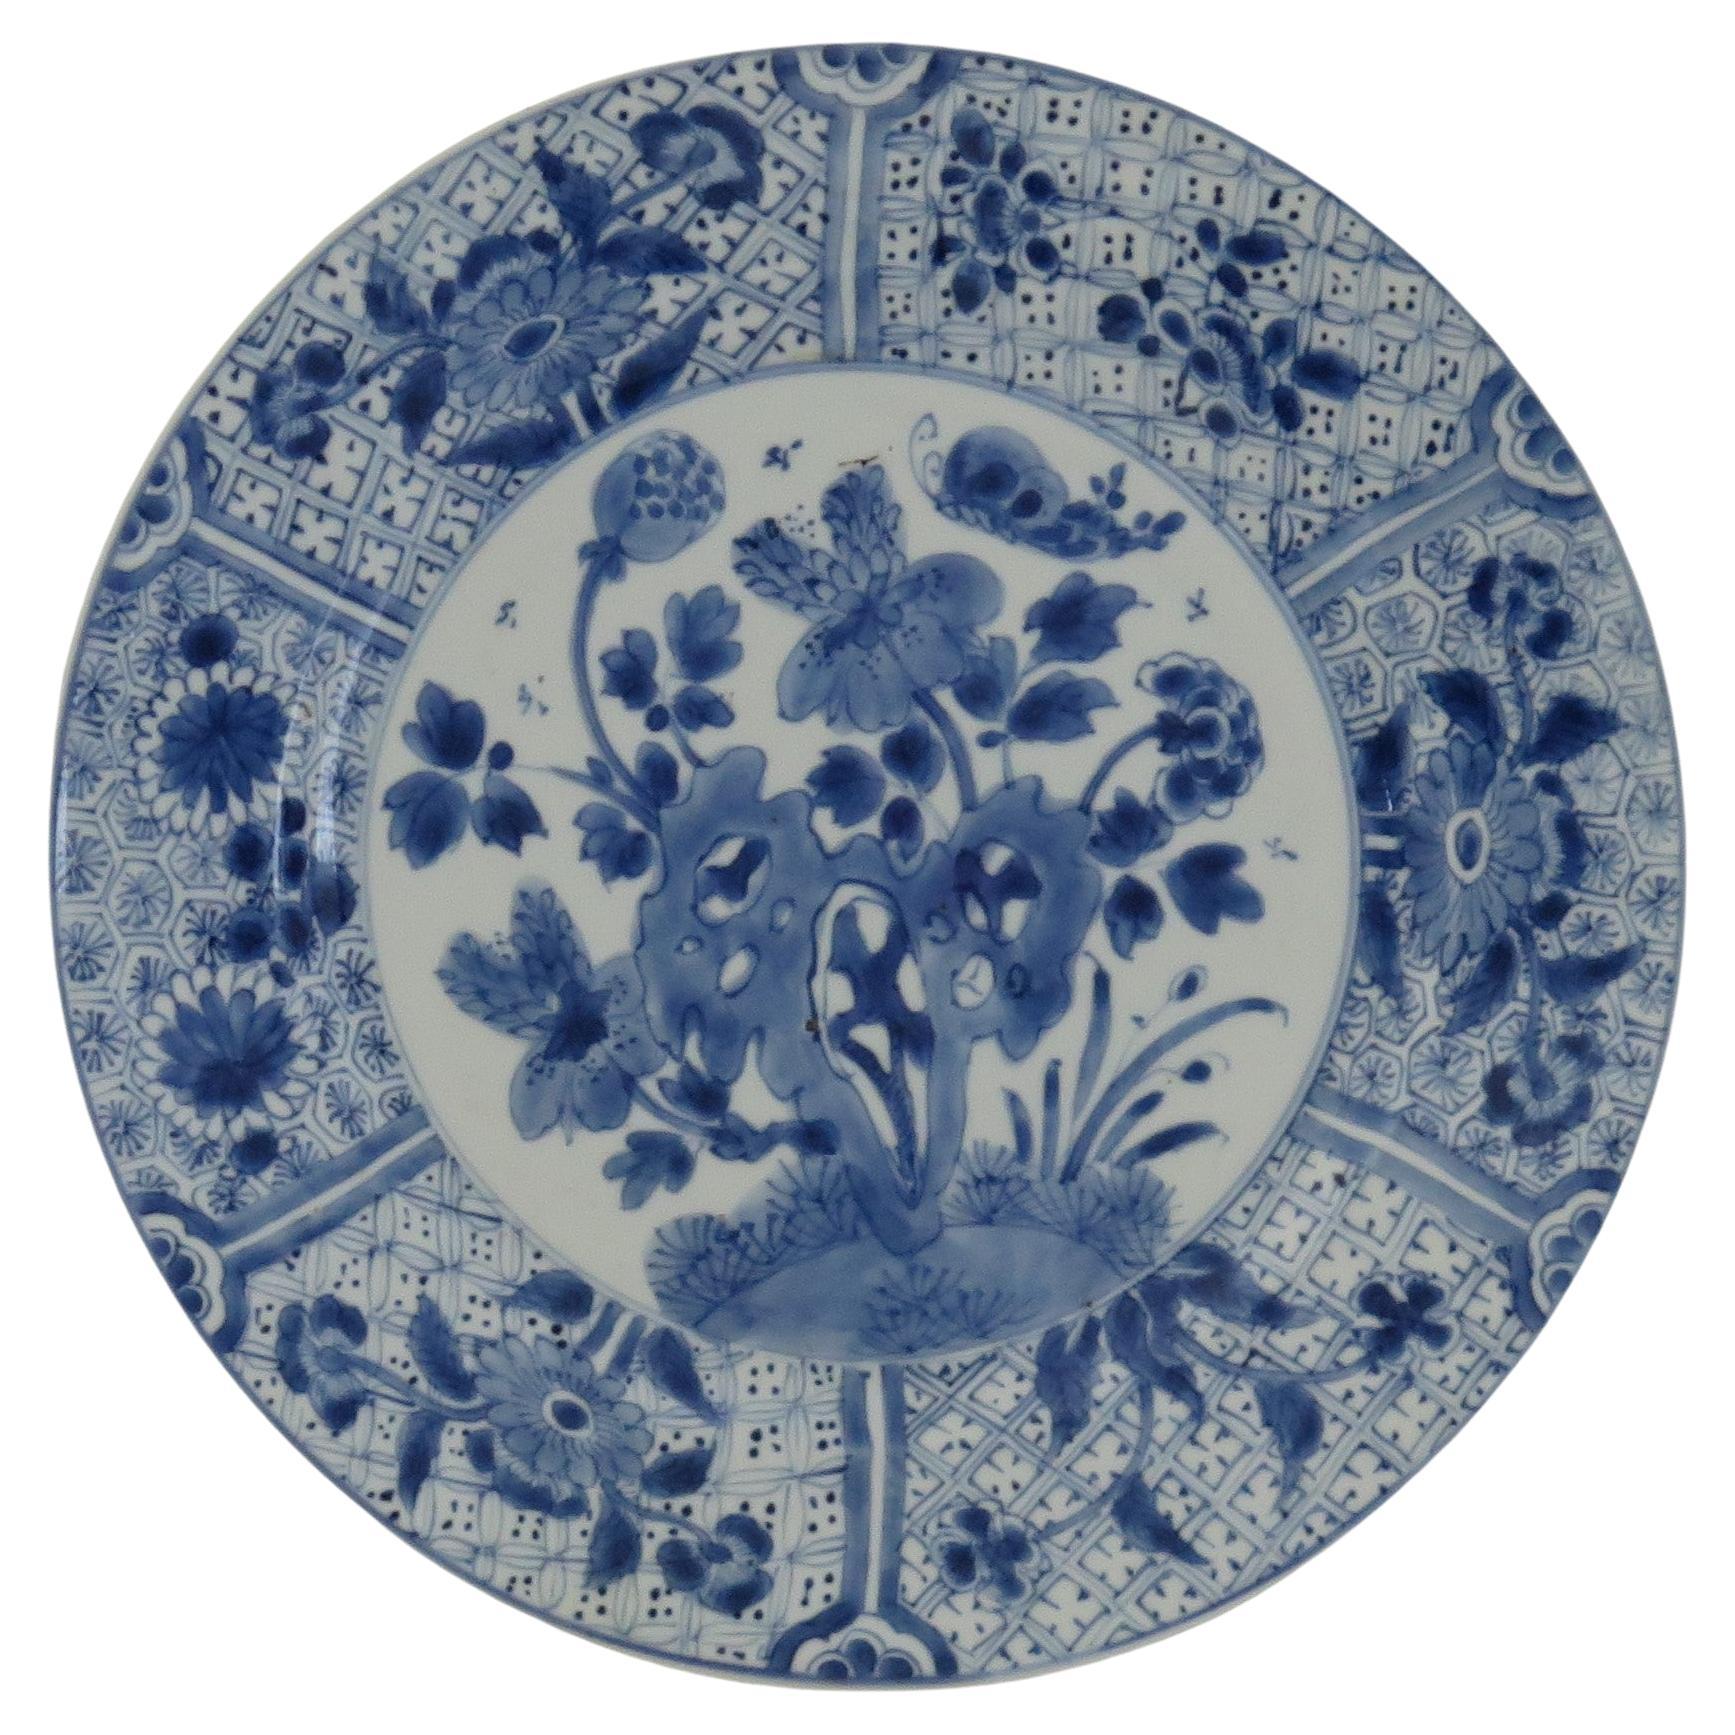 Chinese Kangxi Mark & period Plate or Dish Porcelain Blue & White, Ca 1700